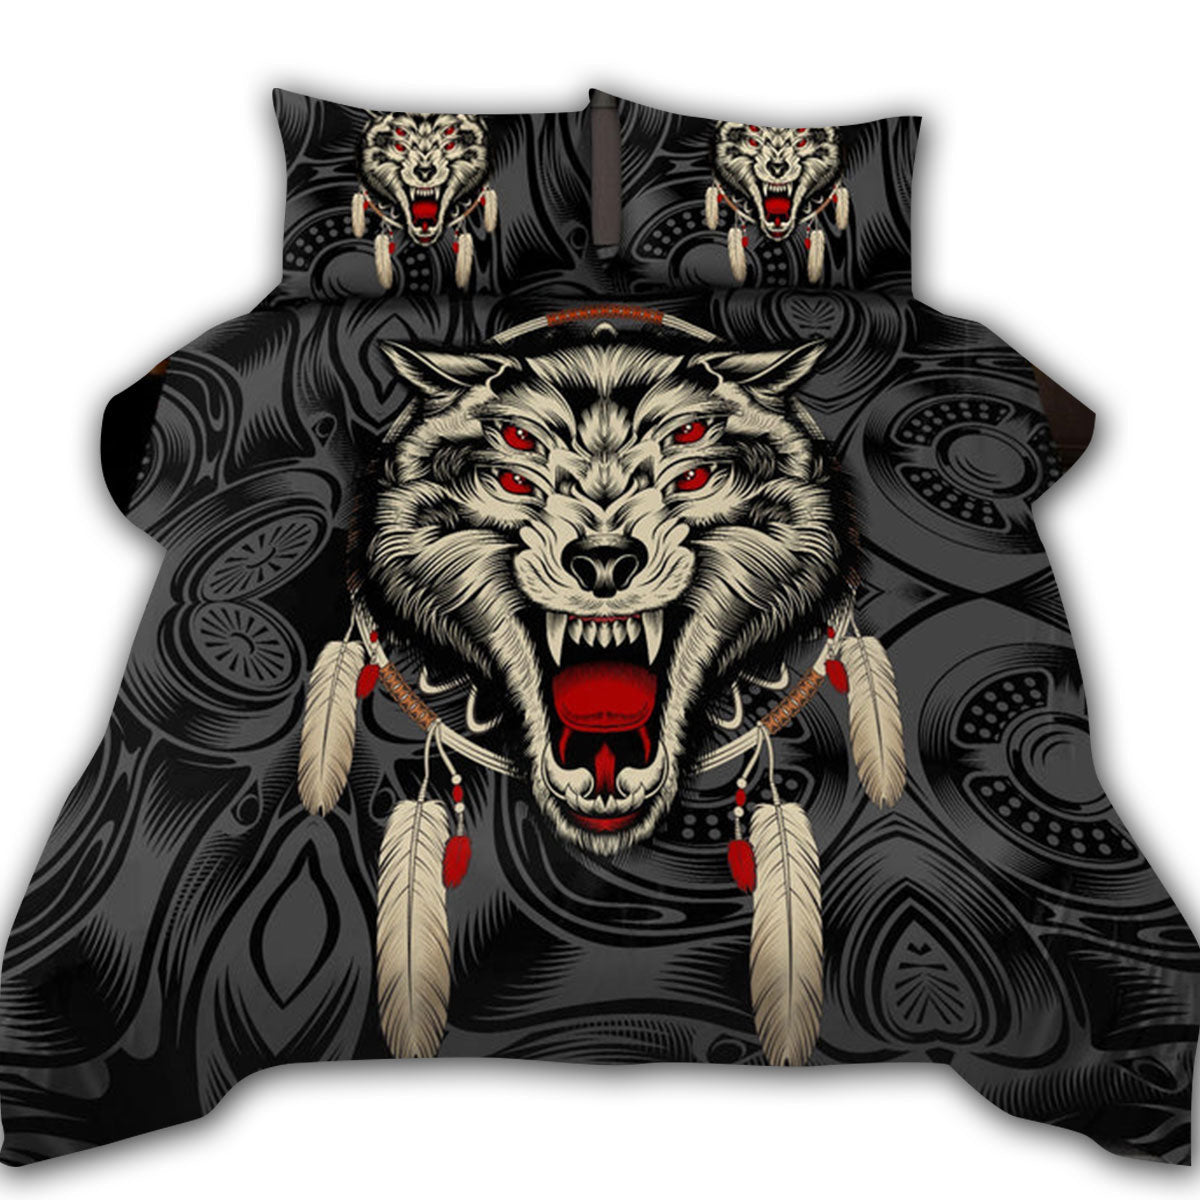 US / Twin (68" x 86") Native Wolf Black And White Style So Cool - Bedding Cover - Owls Matrix LTD